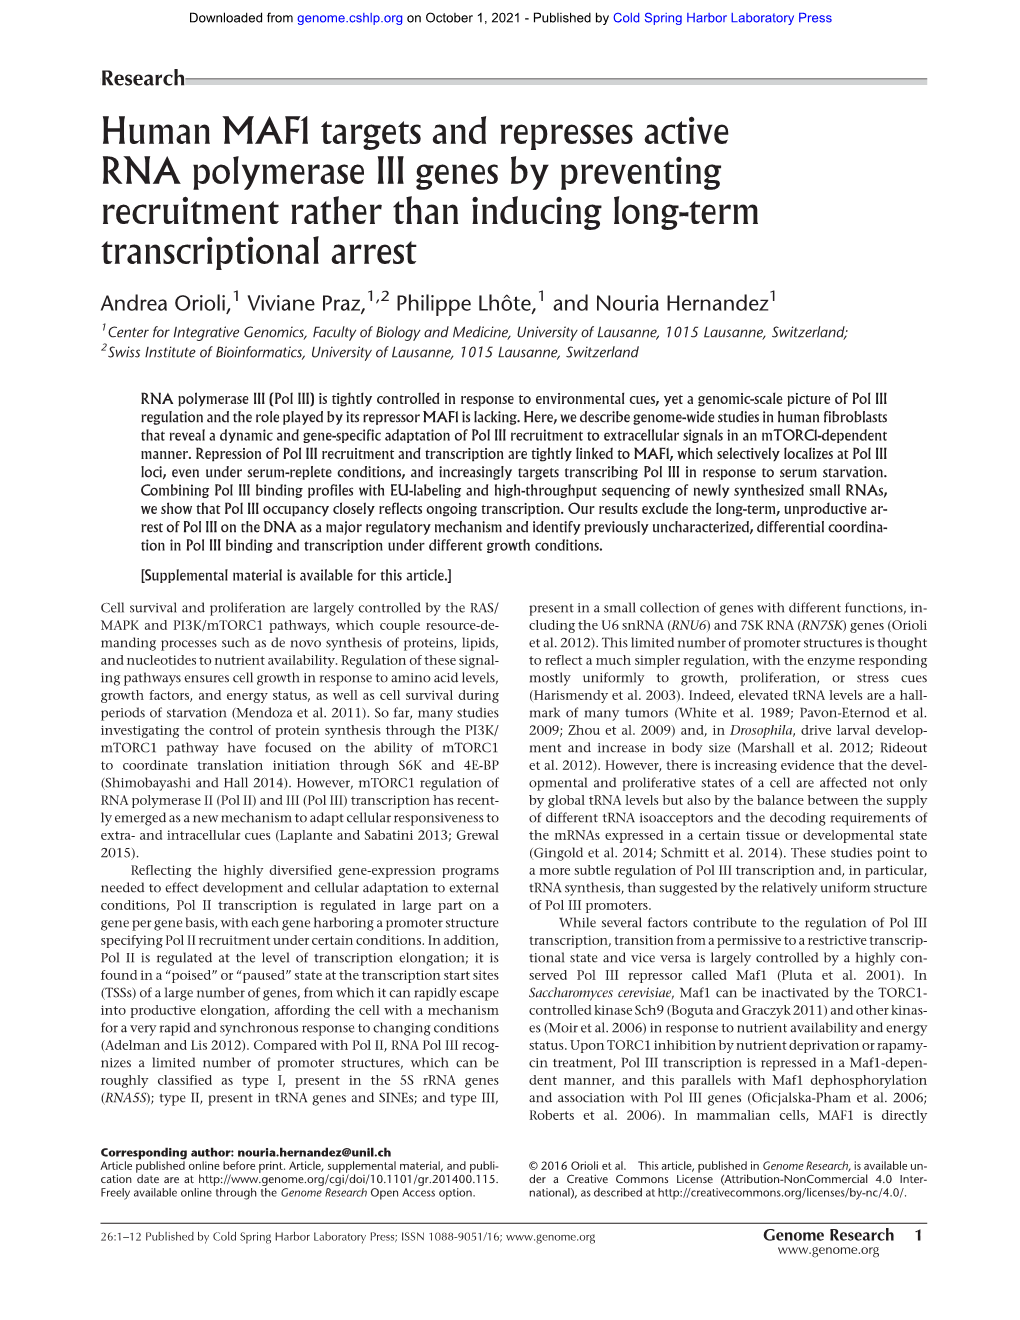 Human MAF1 Targets and Represses Active RNA Polymerase III Genes by Preventing Recruitment Rather Than Inducing Long-Term Transcriptional Arrest